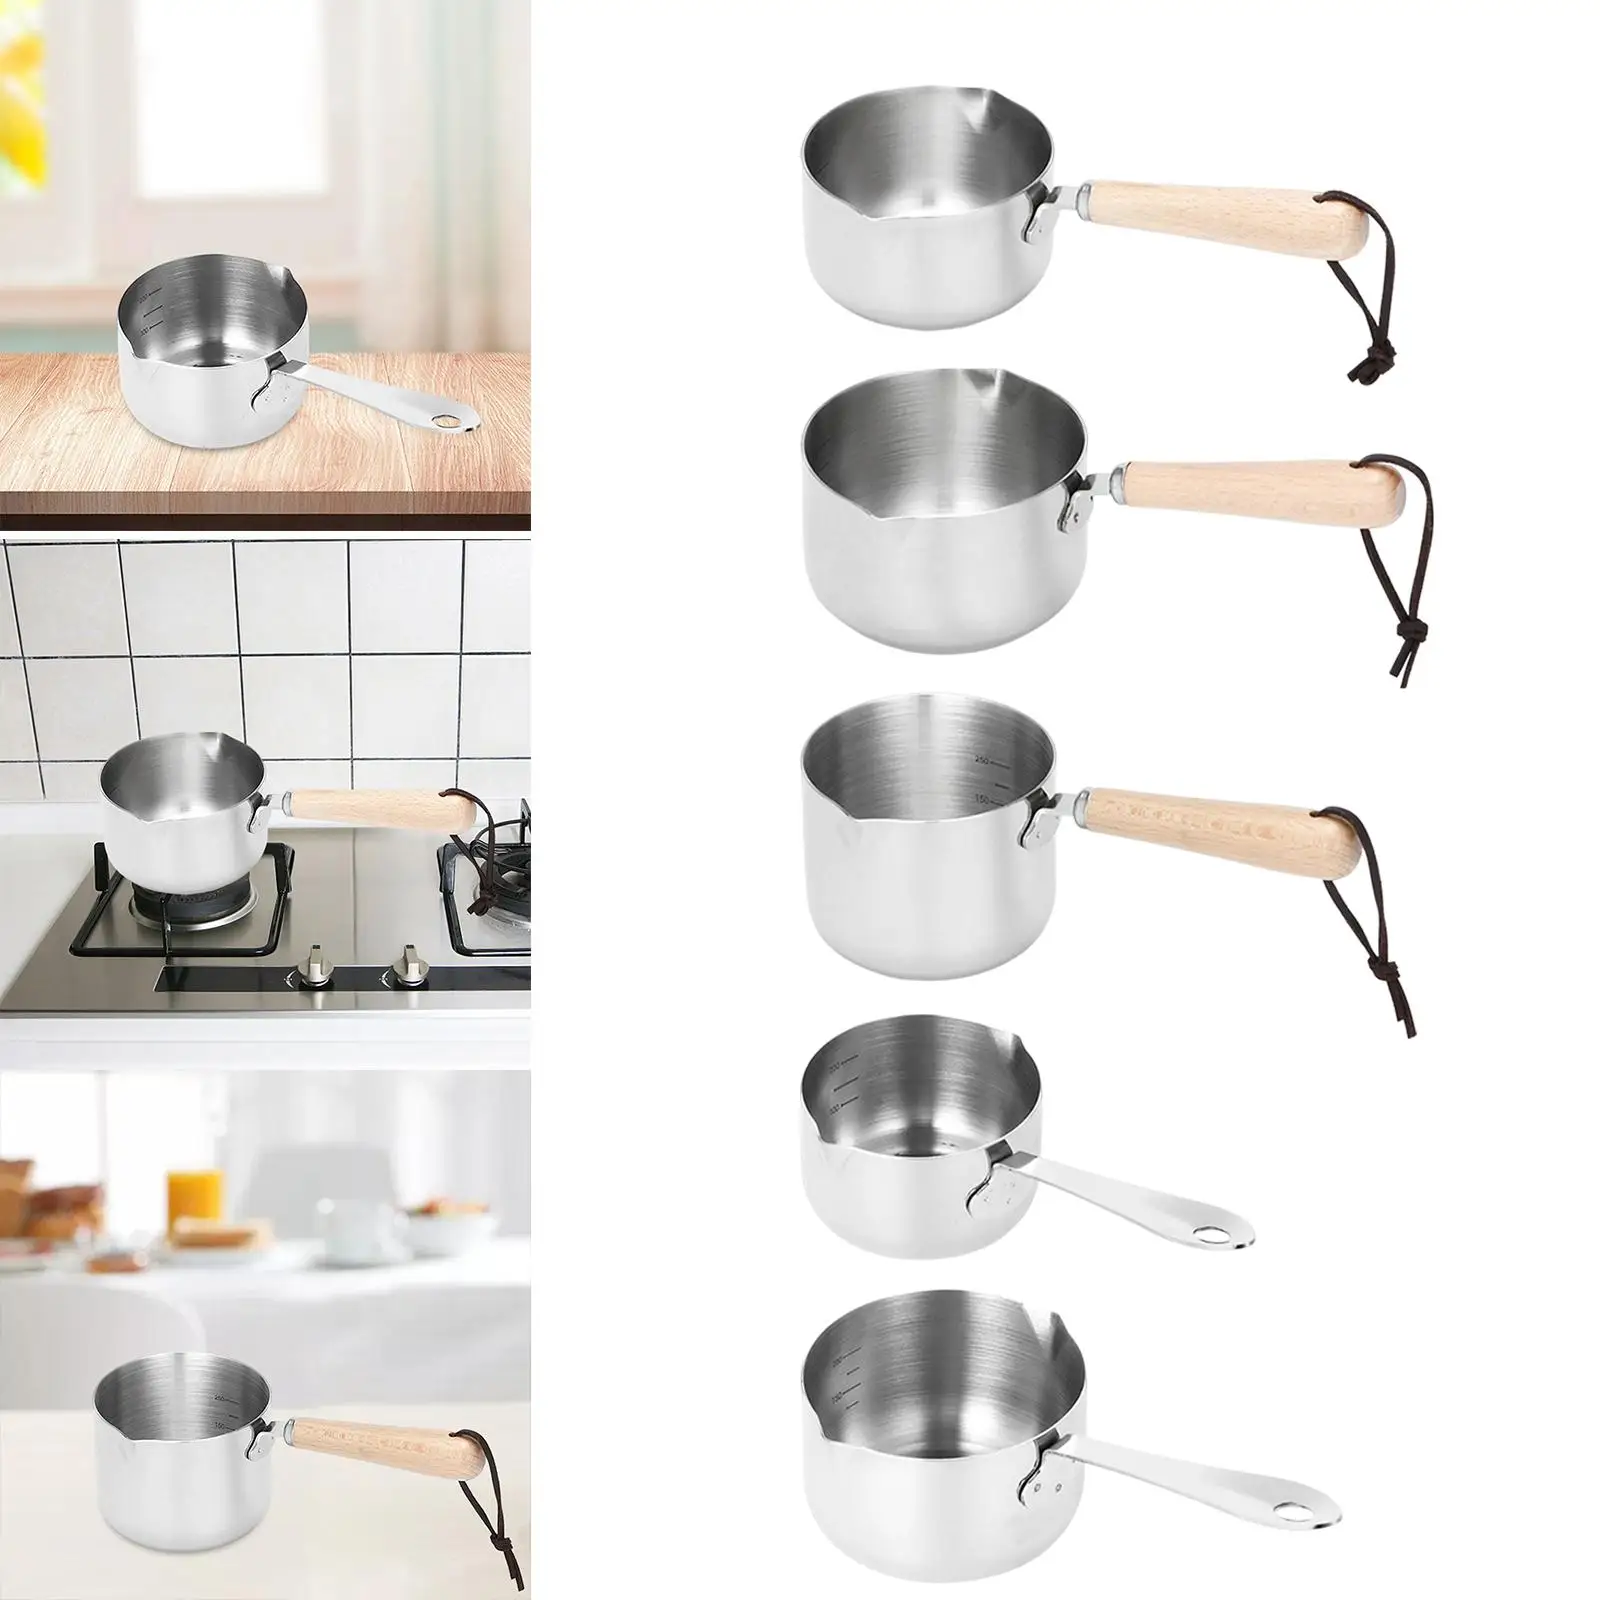 Water Cooking Pots Melting Butter Cookware with Long Handle Saucepan Soup Pot for Induction Cooker Camping RV Travel Home